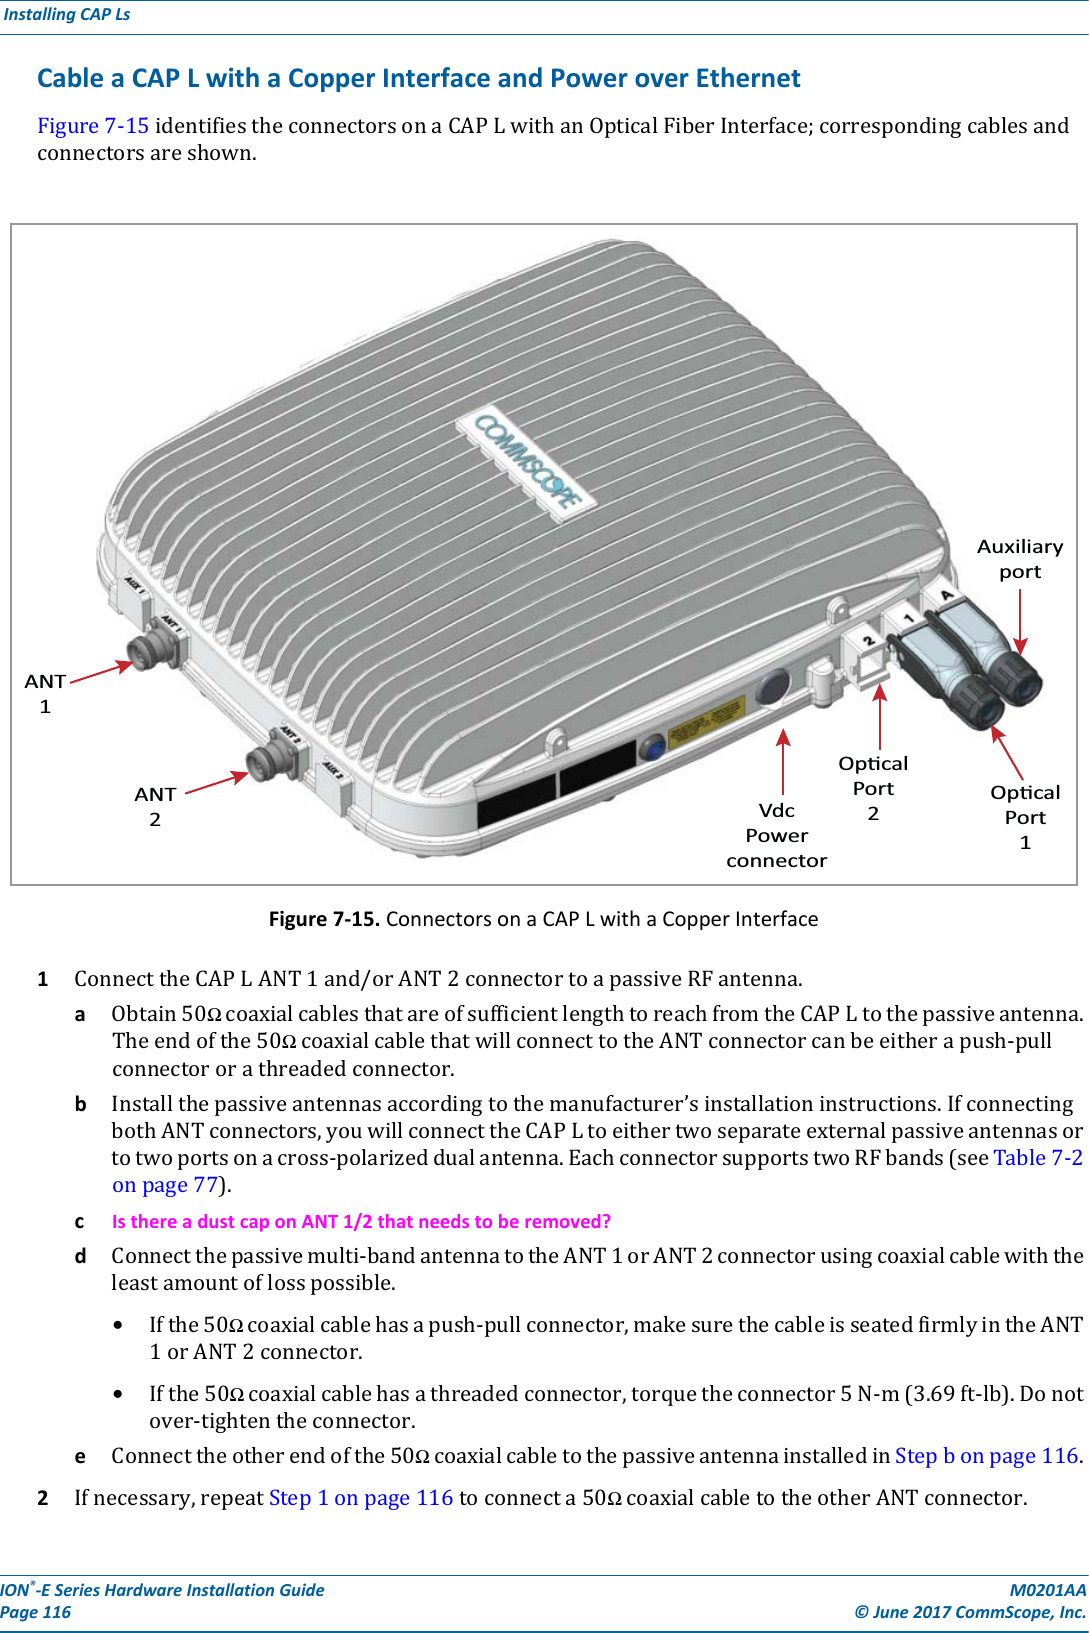 ION®-E Series Hardware Installation Guide M0201AA Page 116 © June 2017 CommScope, Inc. Installing CAP Ls  Cable a CAP L with a Copper Interface and Power over EthernetFigure7-15identifiestheconnectorsonaCAPLwithanOpticalFiberInterface;correspondingcablesandconnectorsareshown.Figure 7-15. Connectors on a CAP L with a Copper Interface1ConnecttheCAPLANT1and/orANT2connectortoapassiveRFantenna.aObtain50ΩcoaxialcablesthatareofsufficientlengthtoreachfromtheCAPLtothepassiveantenna.Theendofthe50ΩcoaxialcablethatwillconnecttotheANTconnectorcanbeeitherapush-pullconnectororathreadedconnector.bInstallthepassiveantennasaccordingtothemanufacturer’sinstallationinstructions.IfconnectingbothANTconnectors,youwillconnecttheCAPLtoeithertwoseparateexternalpassiveantennasortotwoportsonacross-polarizeddualantenna.EachconnectorsupportstwoRFbands(seeTable7-2onpage77).cIs there a dust cap on ANT 1/2 that needs to be removed?dConnectthepassivemulti-bandantennatotheANT1orANT2connectorusingcoaxialcablewiththeleastamountoflosspossible.•Ifthe50Ωcoaxialcablehasapush-pullconnector,makesurethecableisseatedfirmlyintheANT1orANT2connector.•Ifthe50Ωcoaxialcablehasathreadedconnector,torquetheconnector5N-m(3.69ft-lb).Donotover-tightentheconnector.eConnecttheotherendofthe50ΩcoaxialcabletothepassiveantennainstalledinStepbonpage116.2Ifnecessary,repeatStep1onpage116toconnecta50ΩcoaxialcabletotheotherANTconnector.ANT1ANT2VdcPowerconnectorOpcalPort2OpcalPort1Auxiliaryport